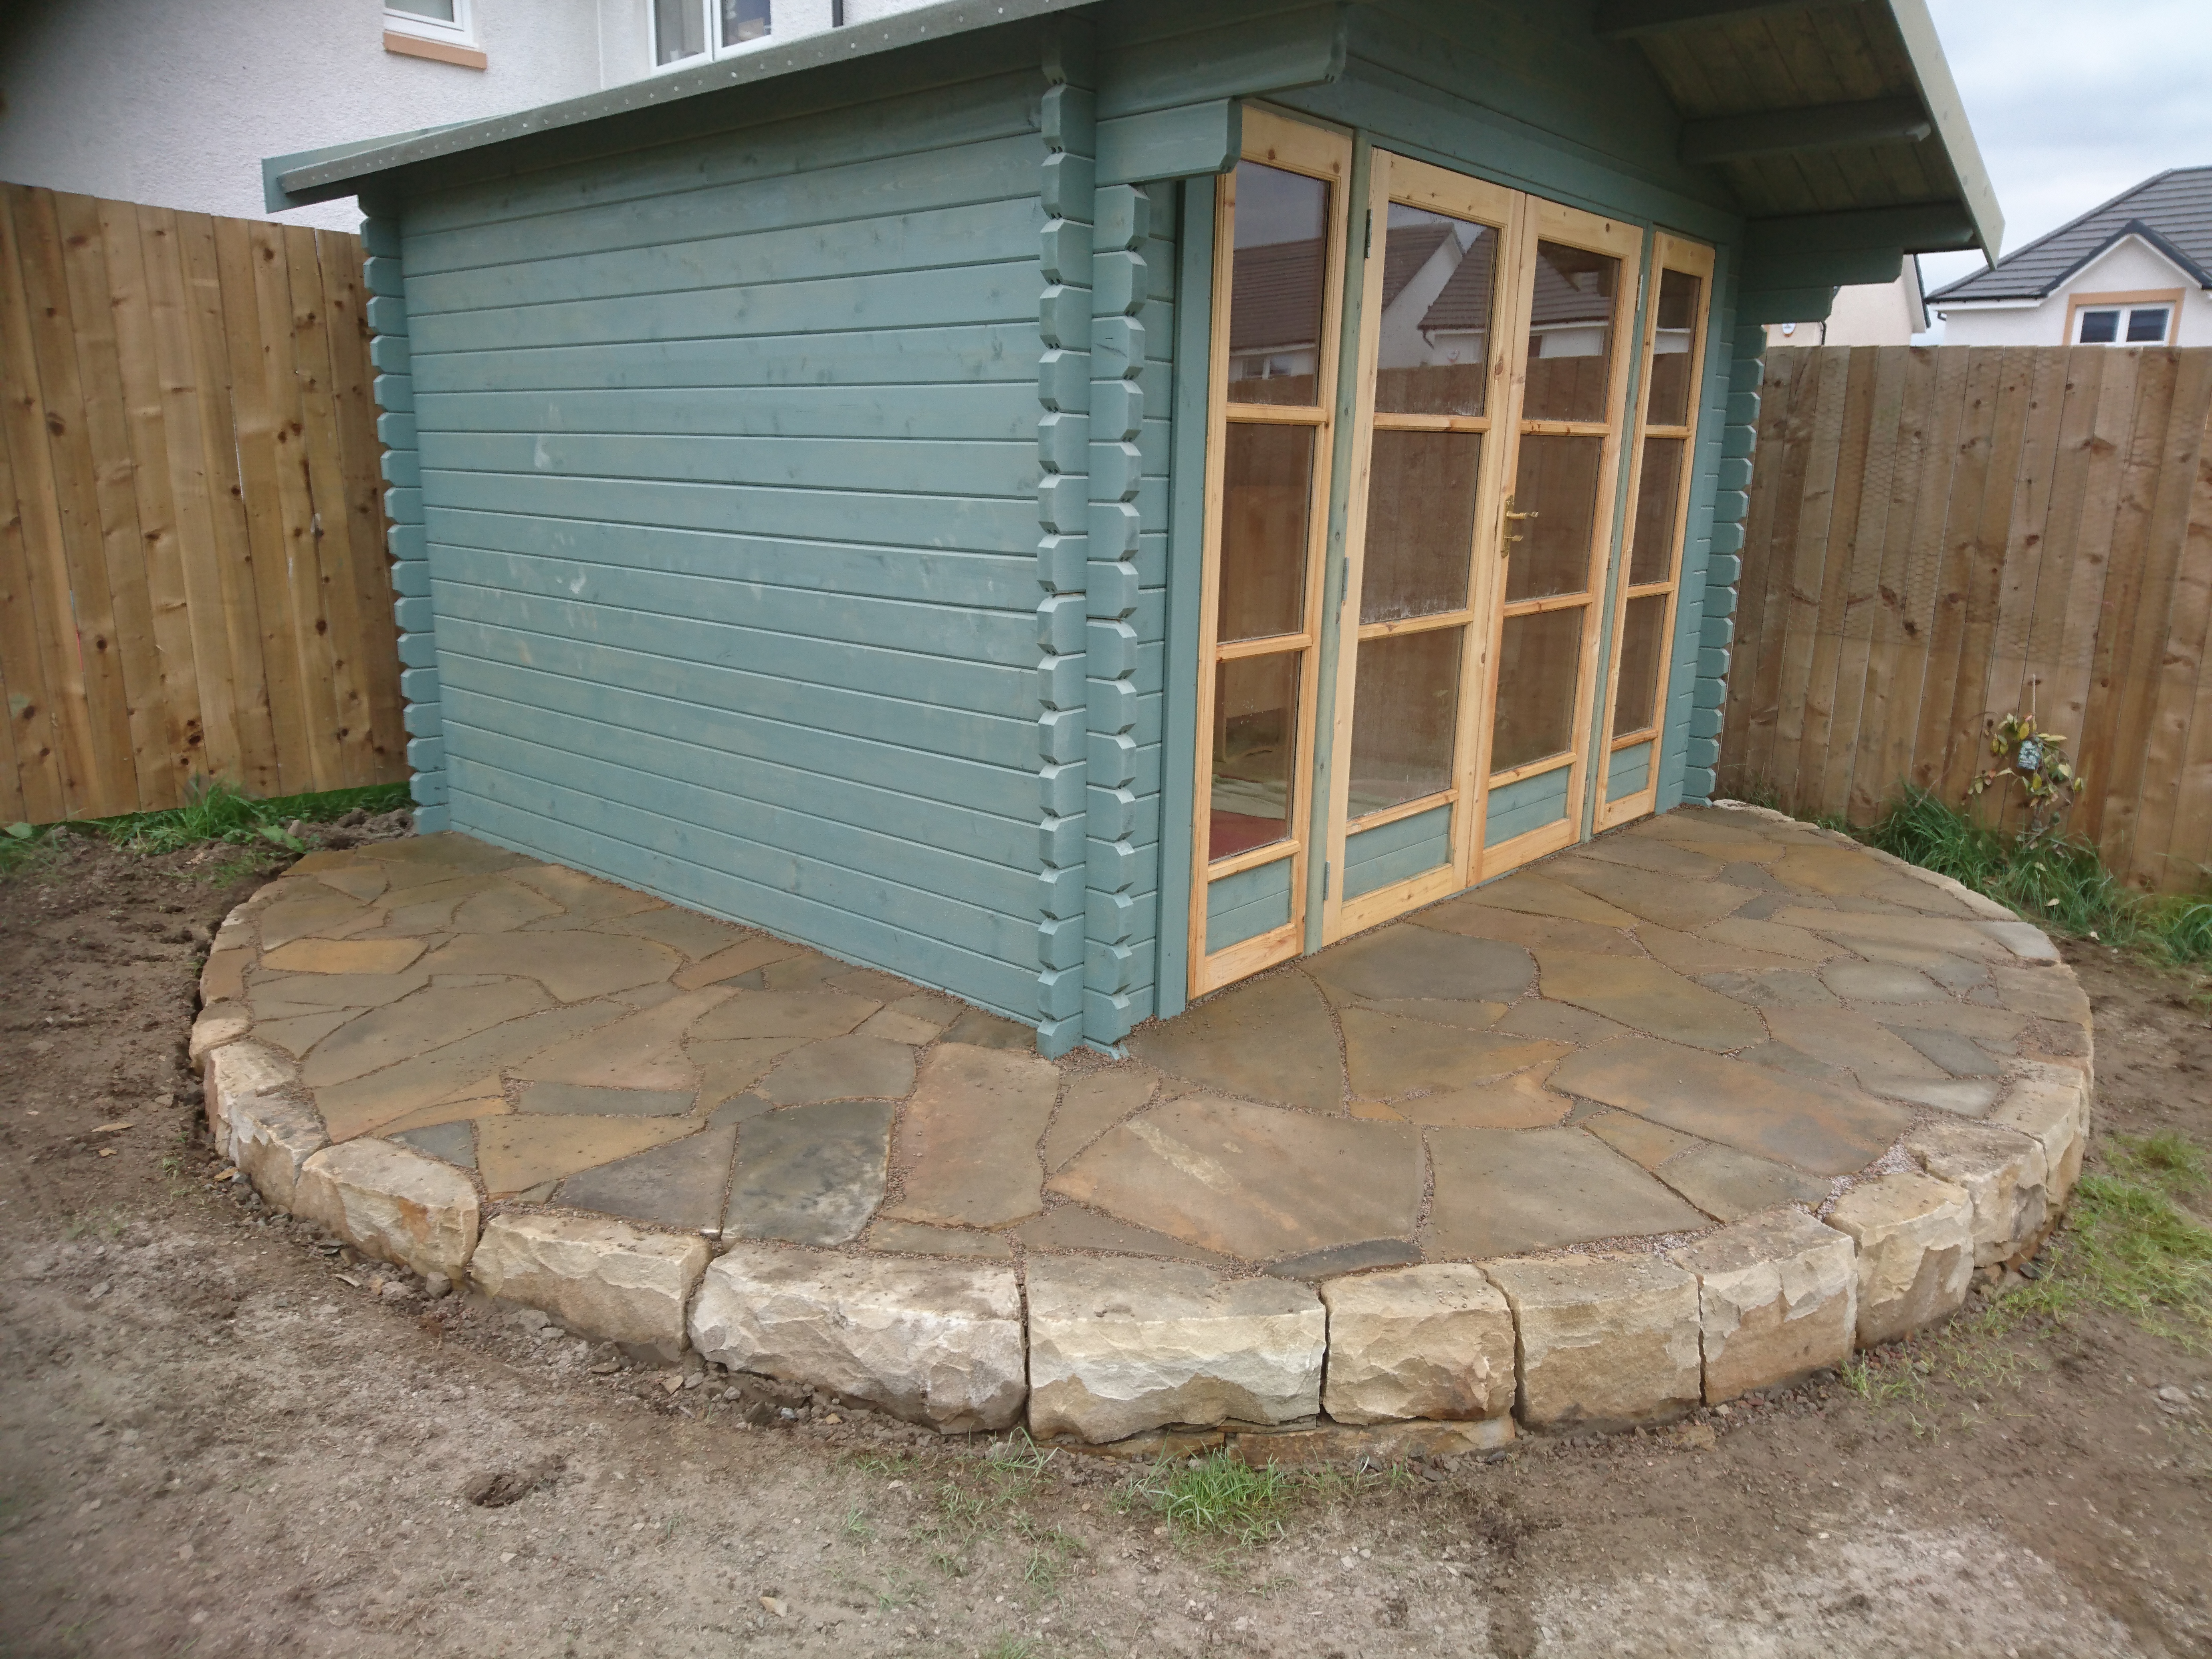 stone base for shed with crazy paving